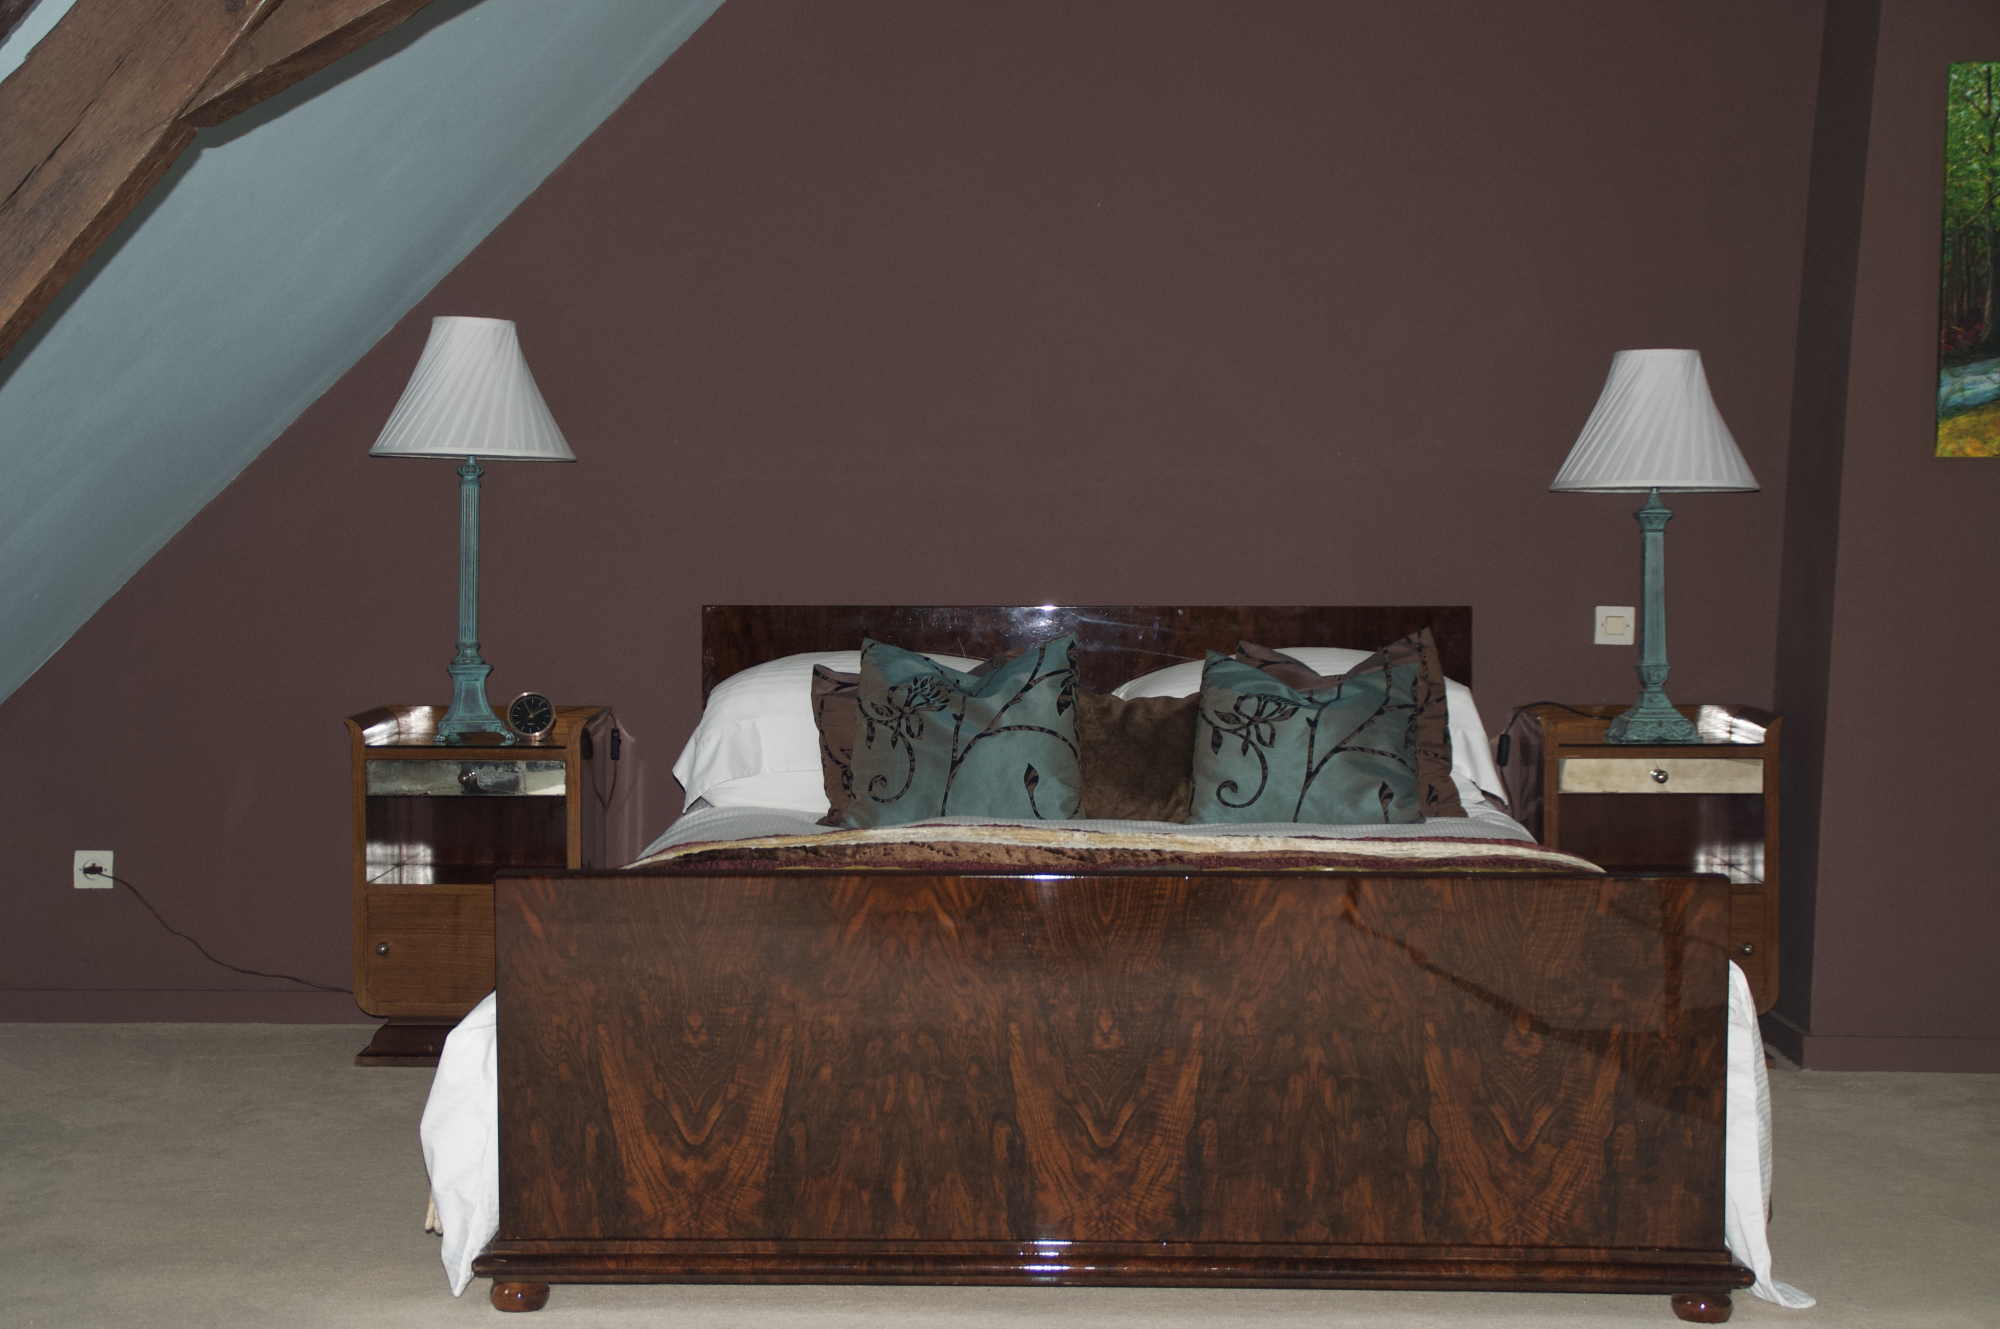 The Macassar ebony bed frame and matching side tables give this room it's name.